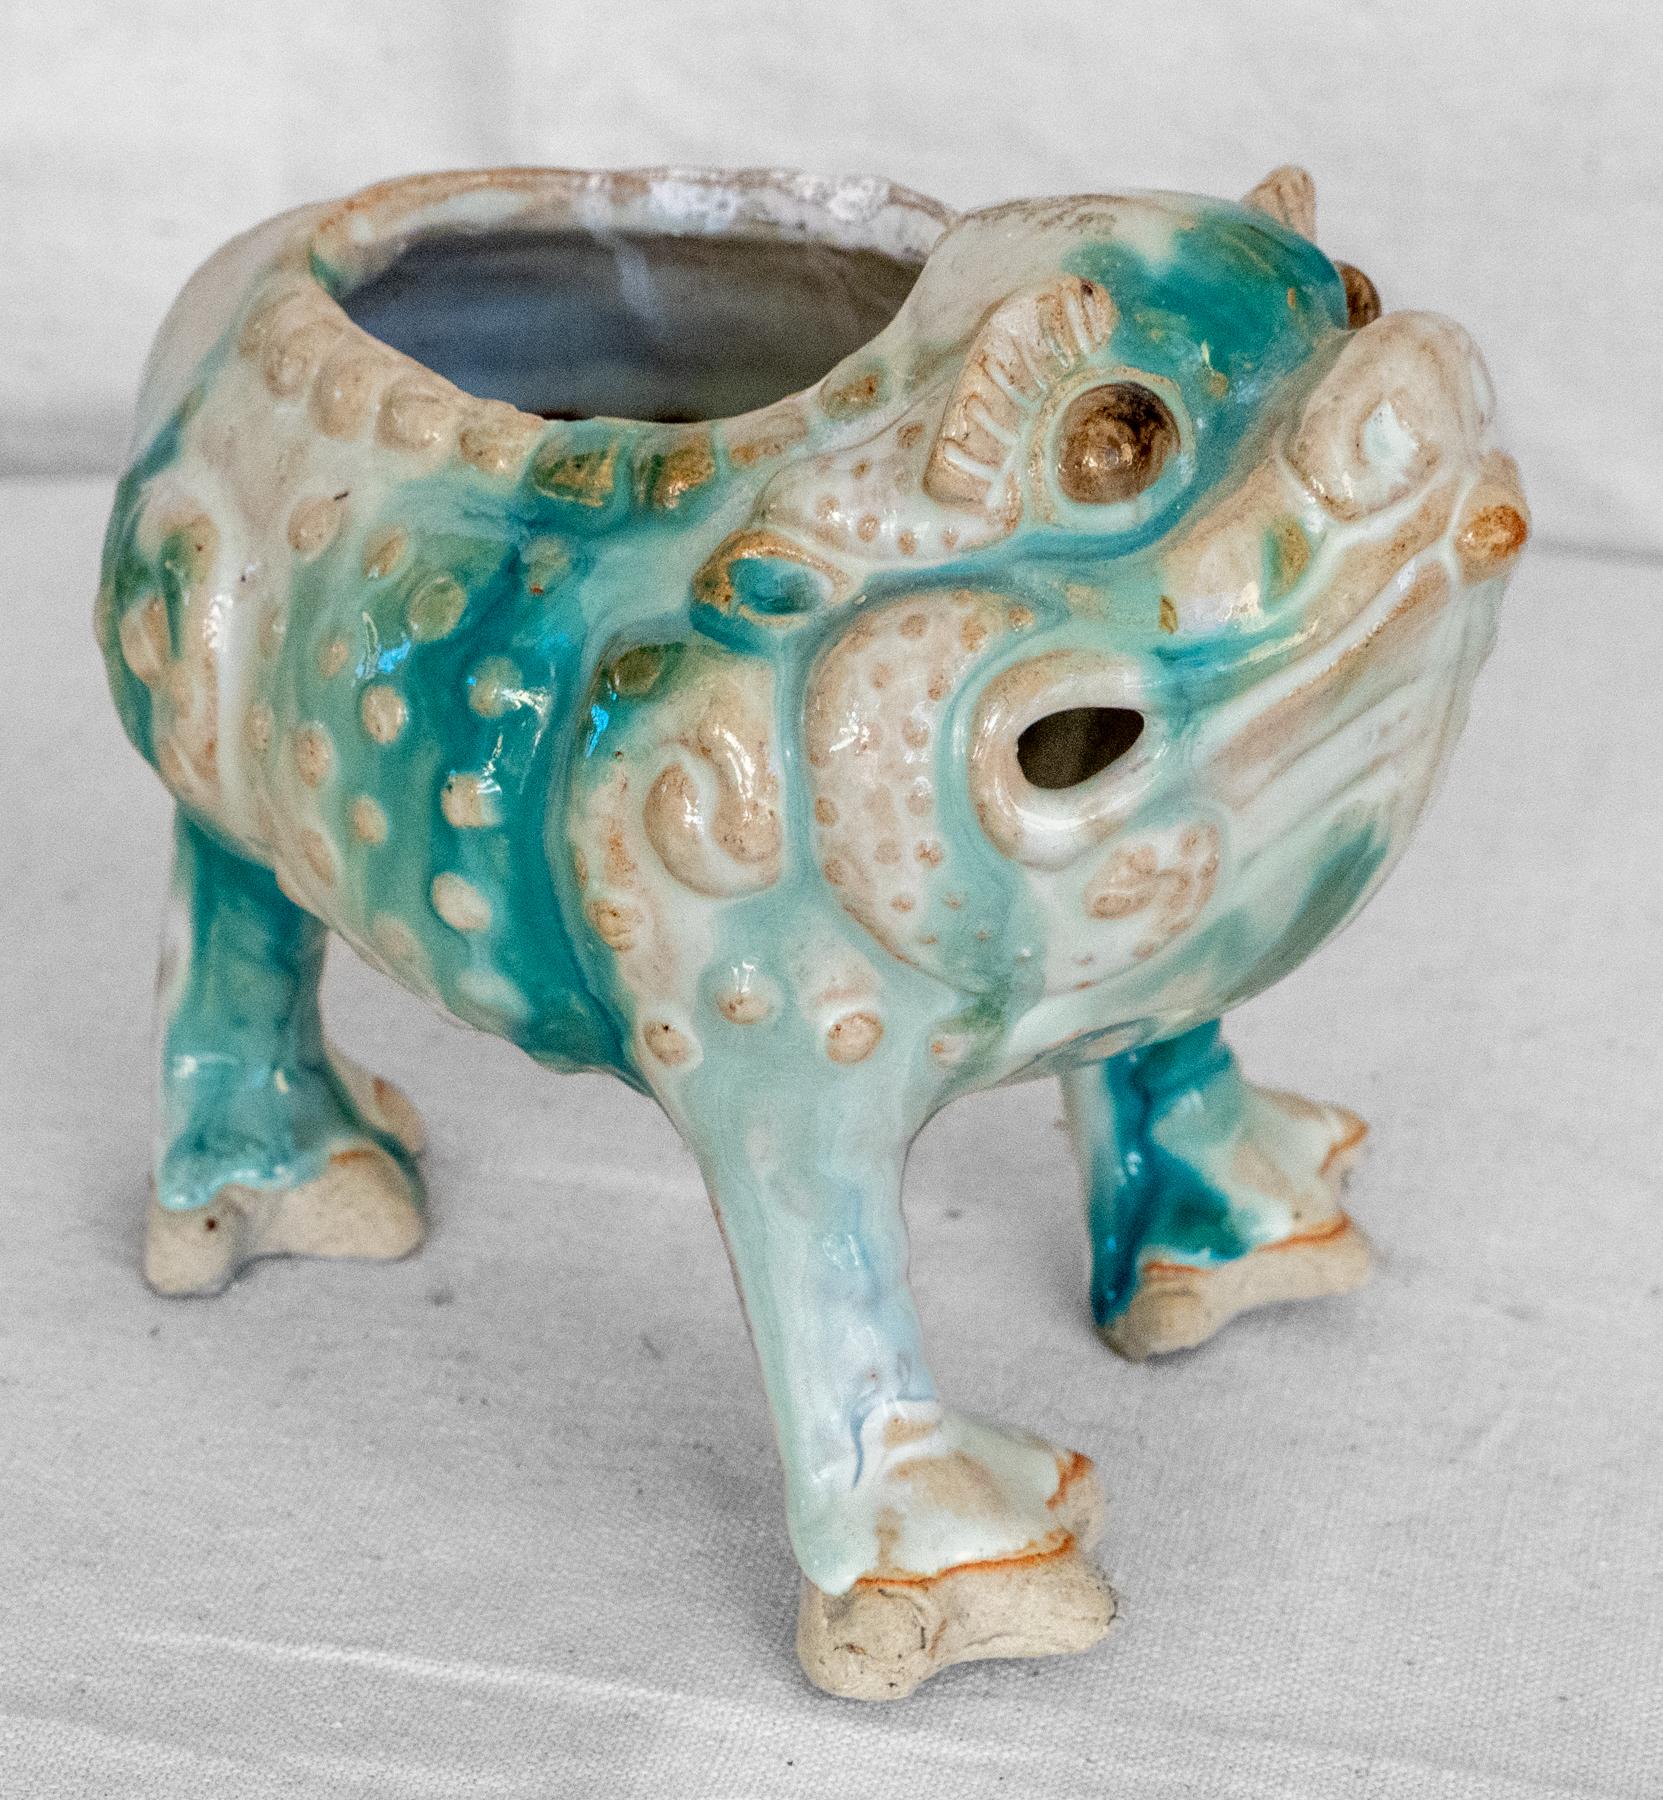 Chinese ceramic 3 leg cash toad, circa 1900. Low fired clay with beautifully applied drip glaze in greens and white. In the style of a Ming Period Censor. 
May also be used as a small bulb bowl. Great decorative presence. The three legged toad /